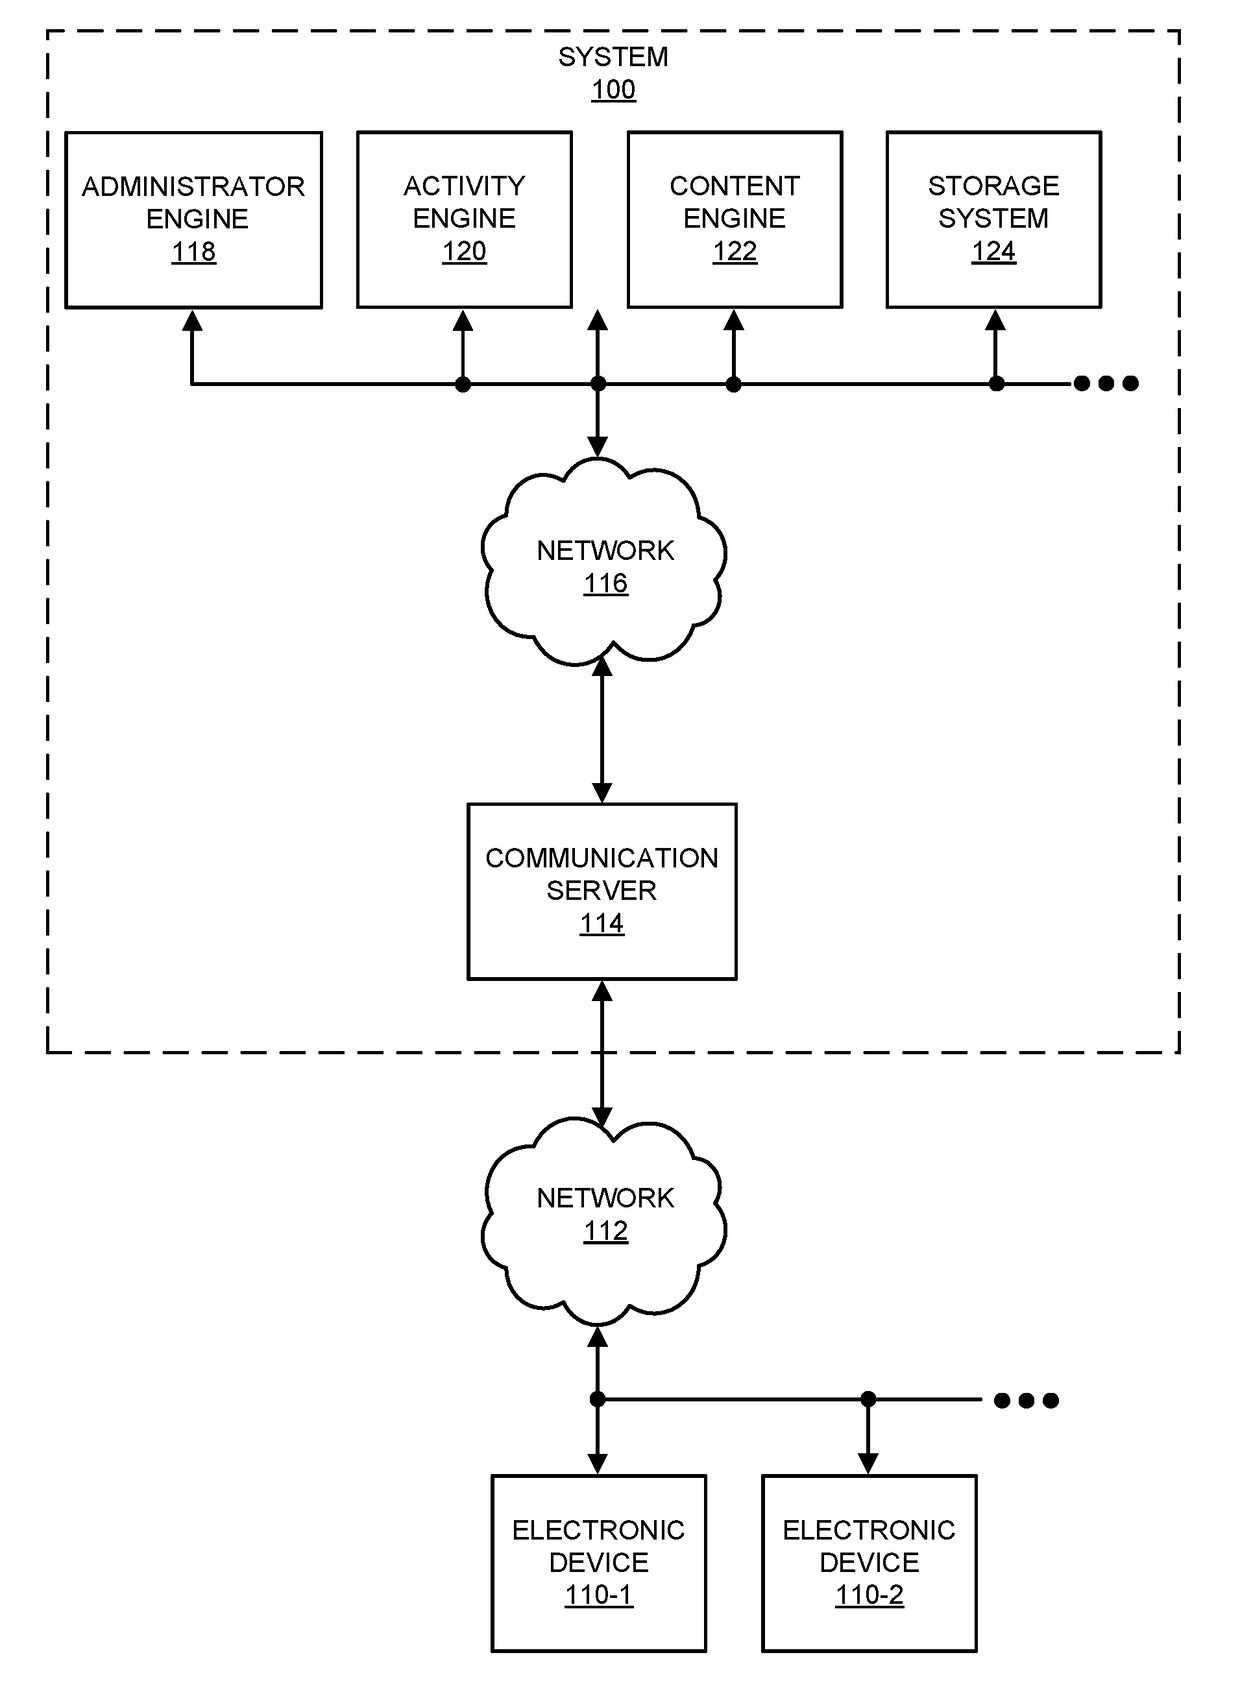 Fan-out control in scalable distributed data stores